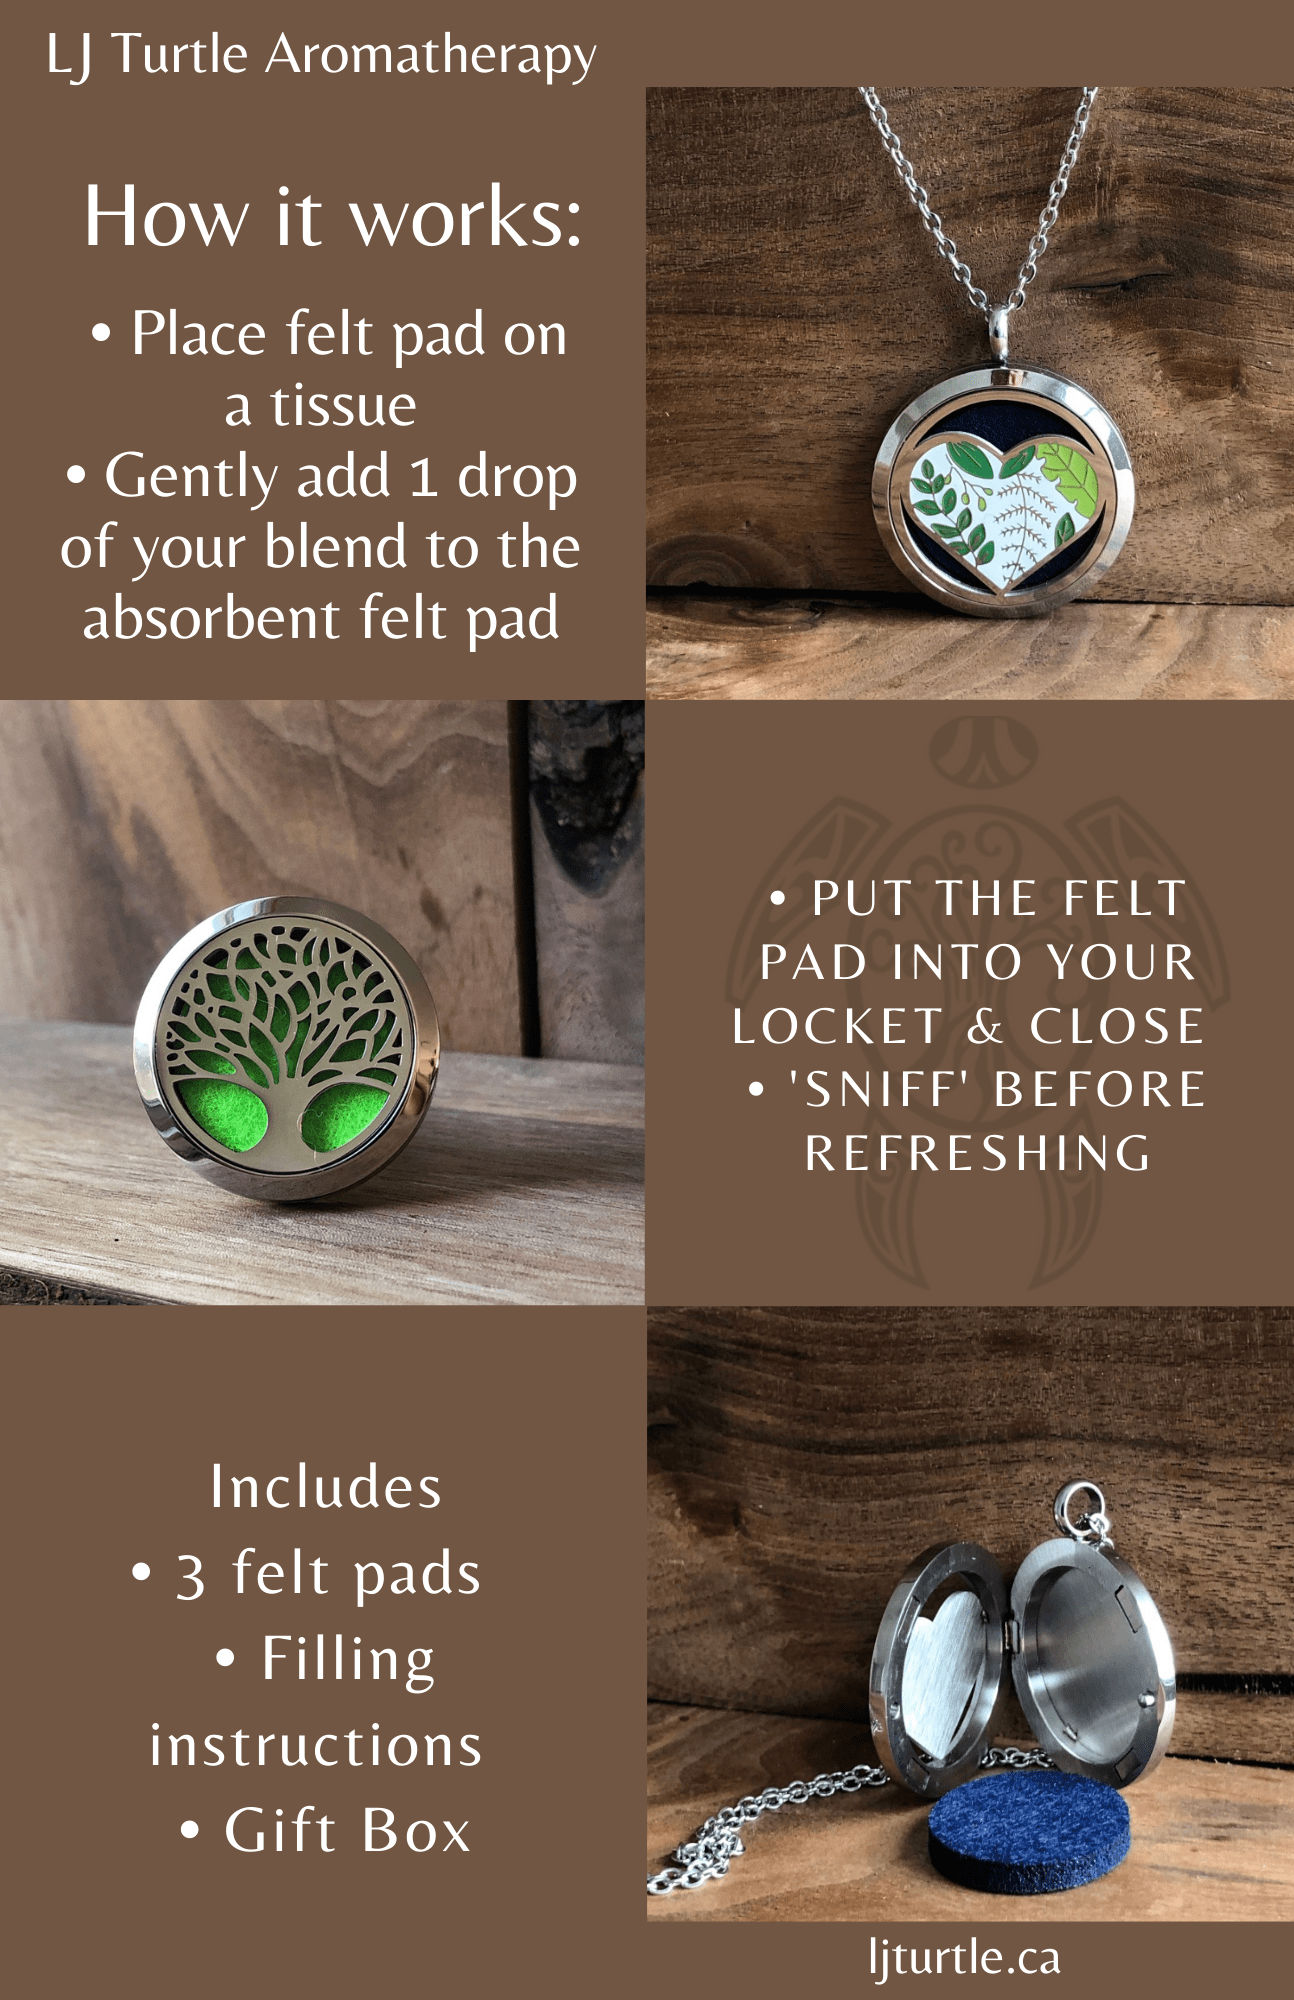 LJ Turtle Aromatherapy & Accessories Vehicle Air Fresheners Mandala | Stainless Steel Aromatherapy Car Diffuser